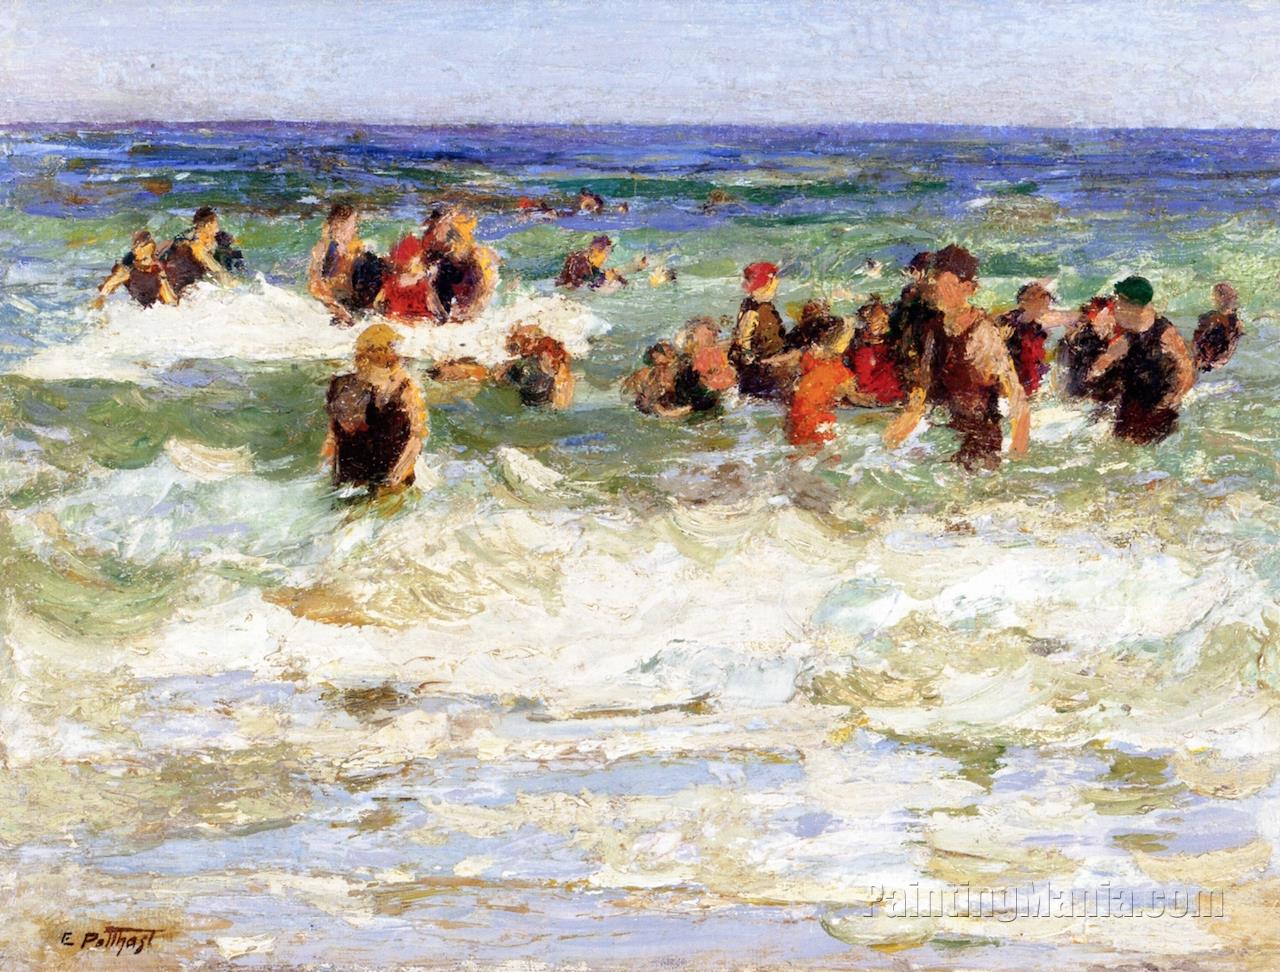 The Swimming Lesson in the Surf